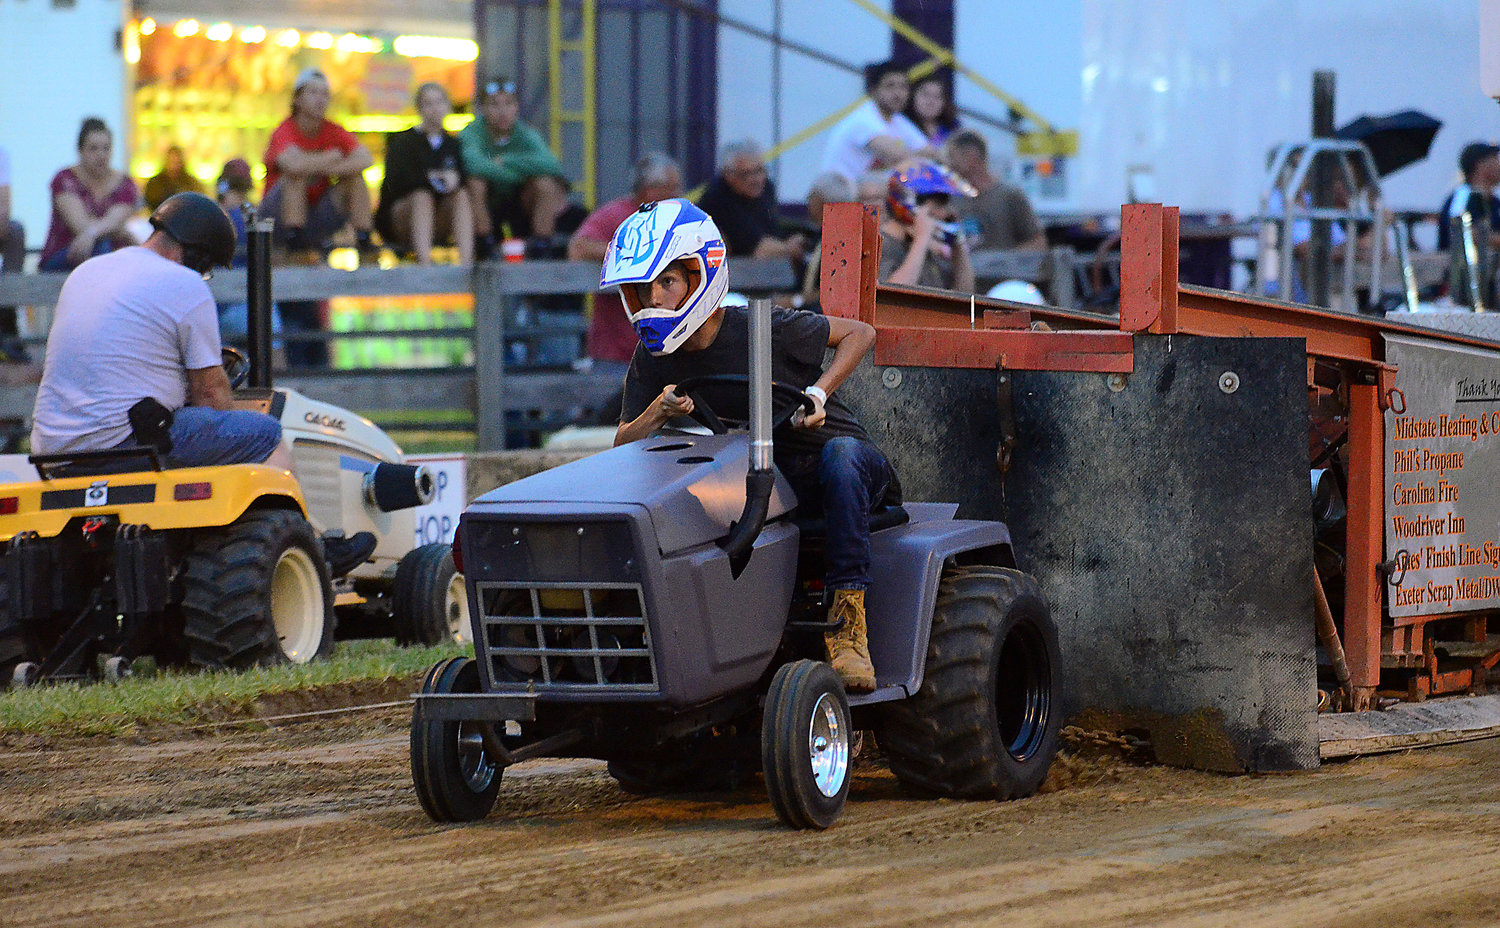 Liam Sylvia, 14, of Westport, revs up his tractor during the D Stock Division tractor pull at the Westport Fair in 2019.